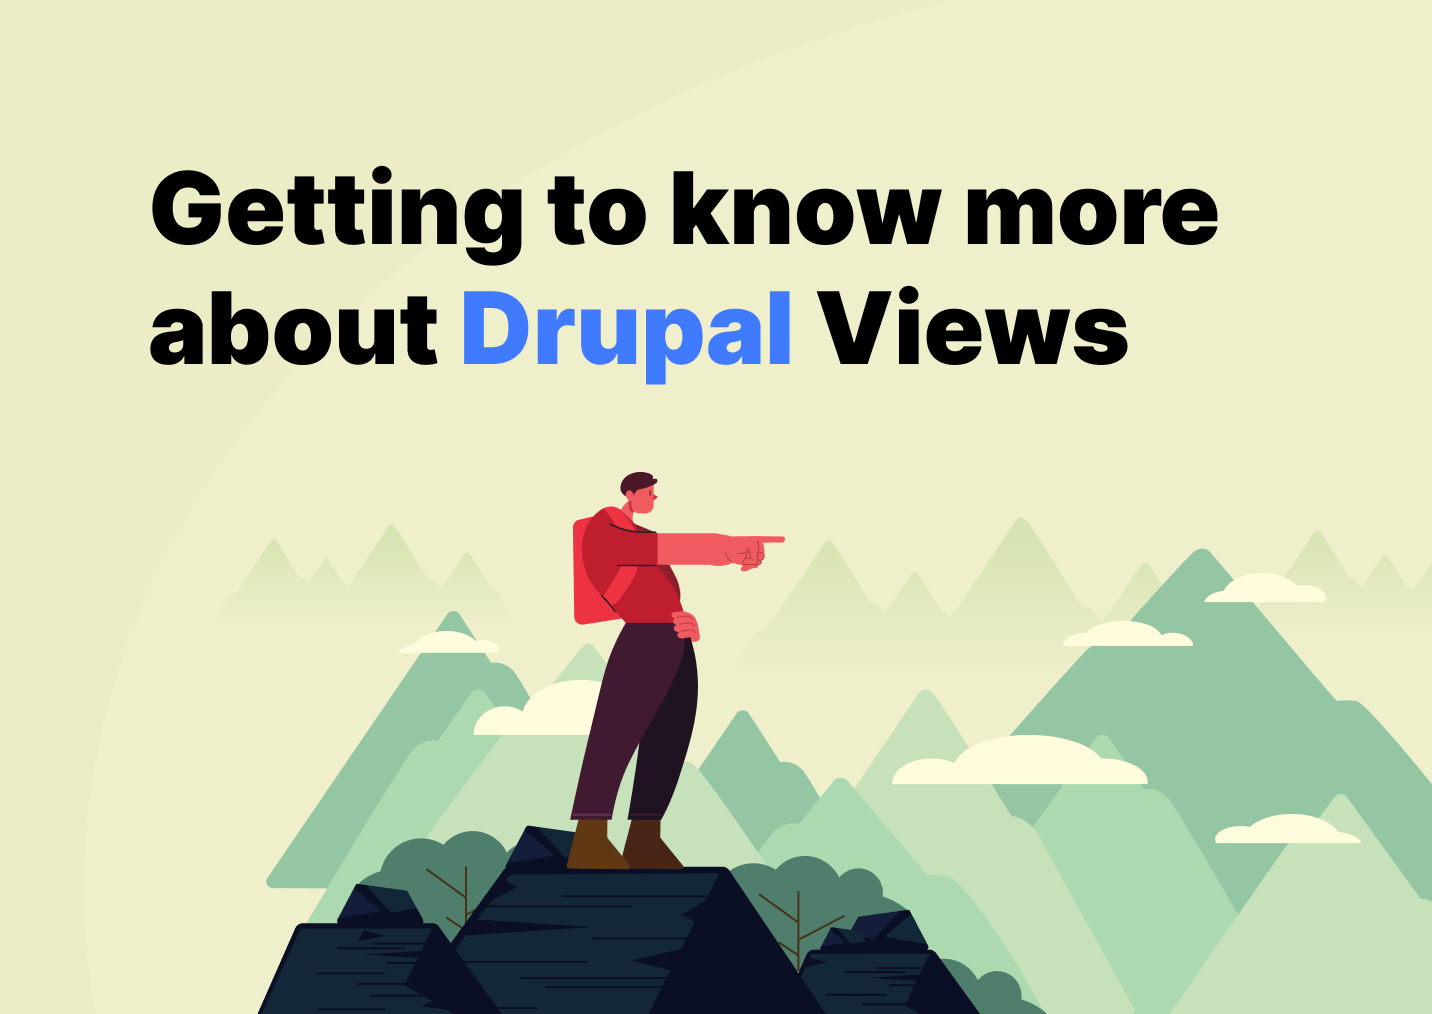 Getting to know more about Drupal Views image